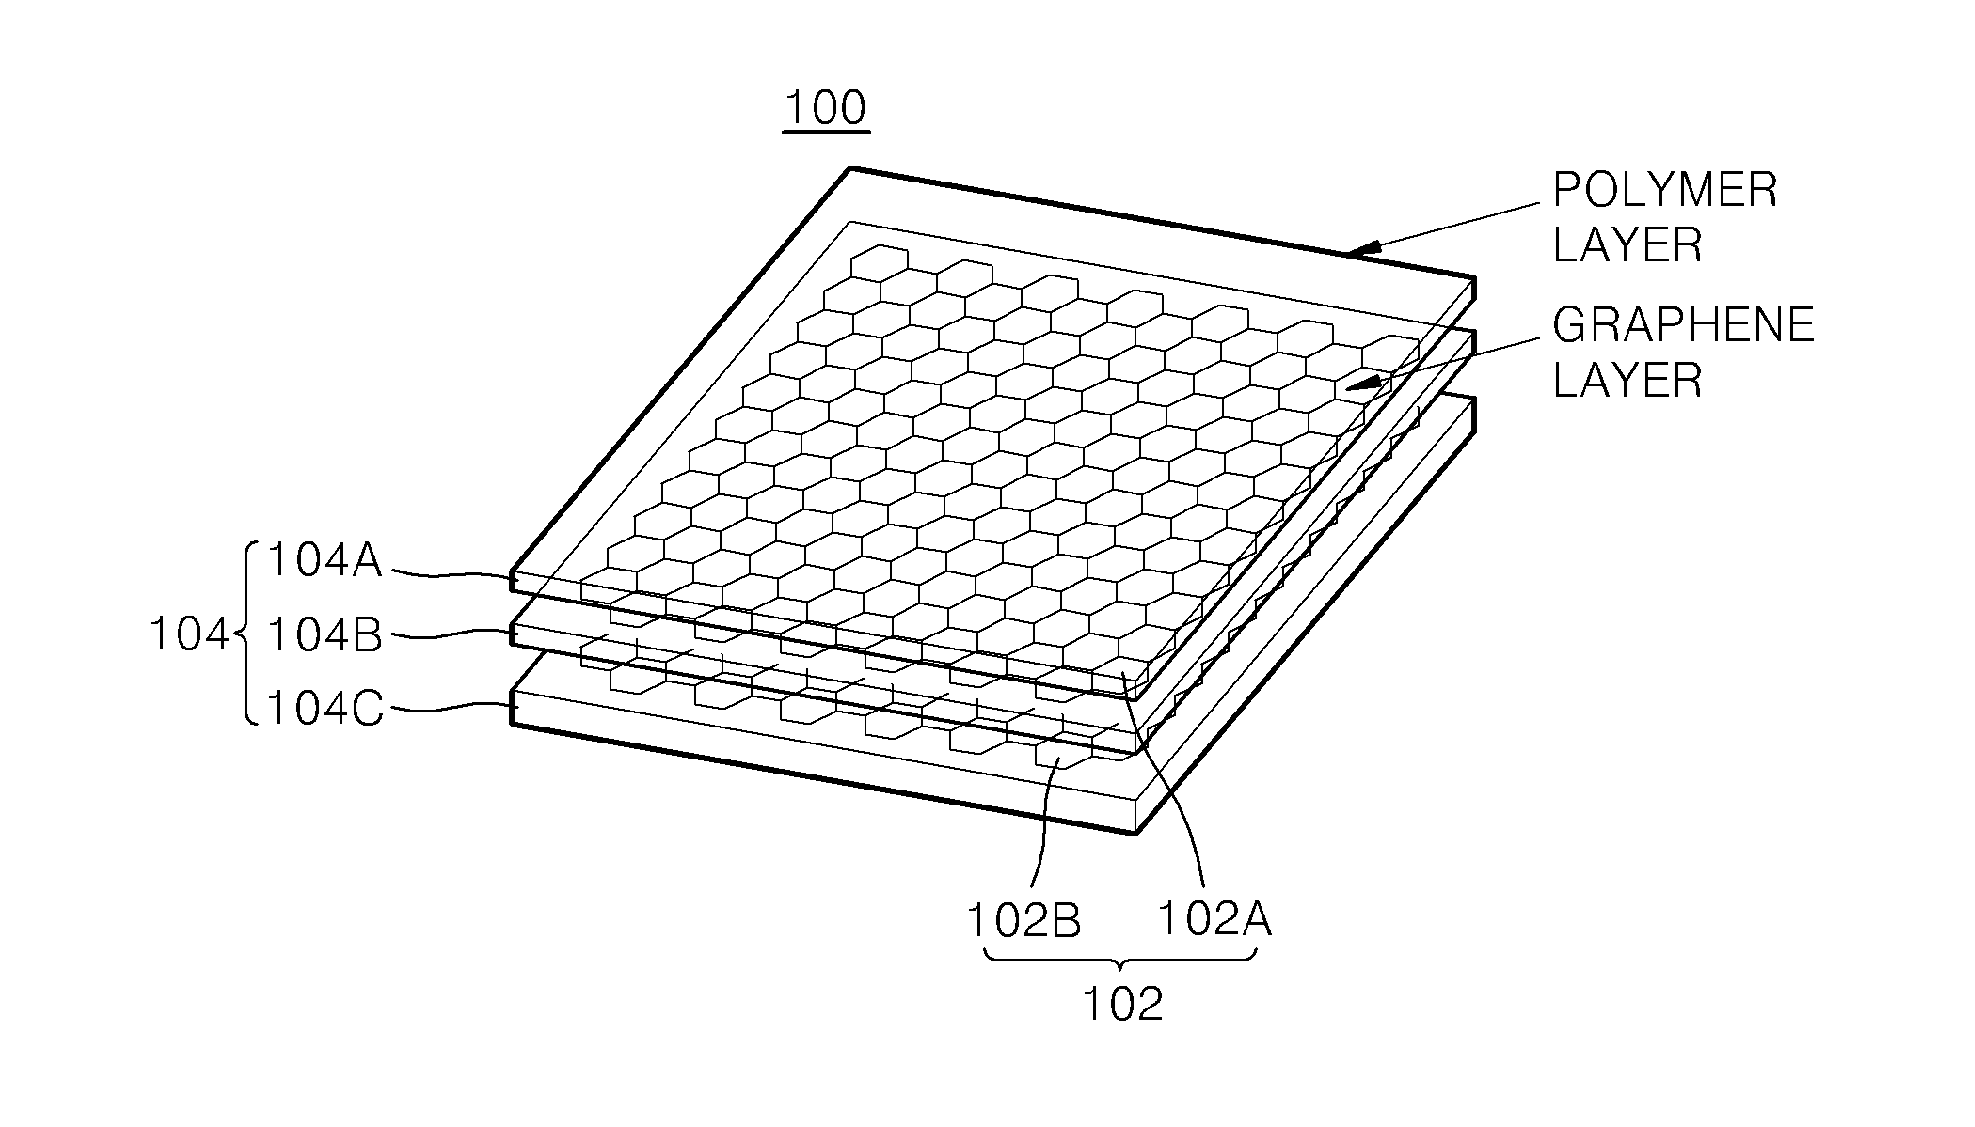 Graphene-polymer layered composite and process for preparing the same